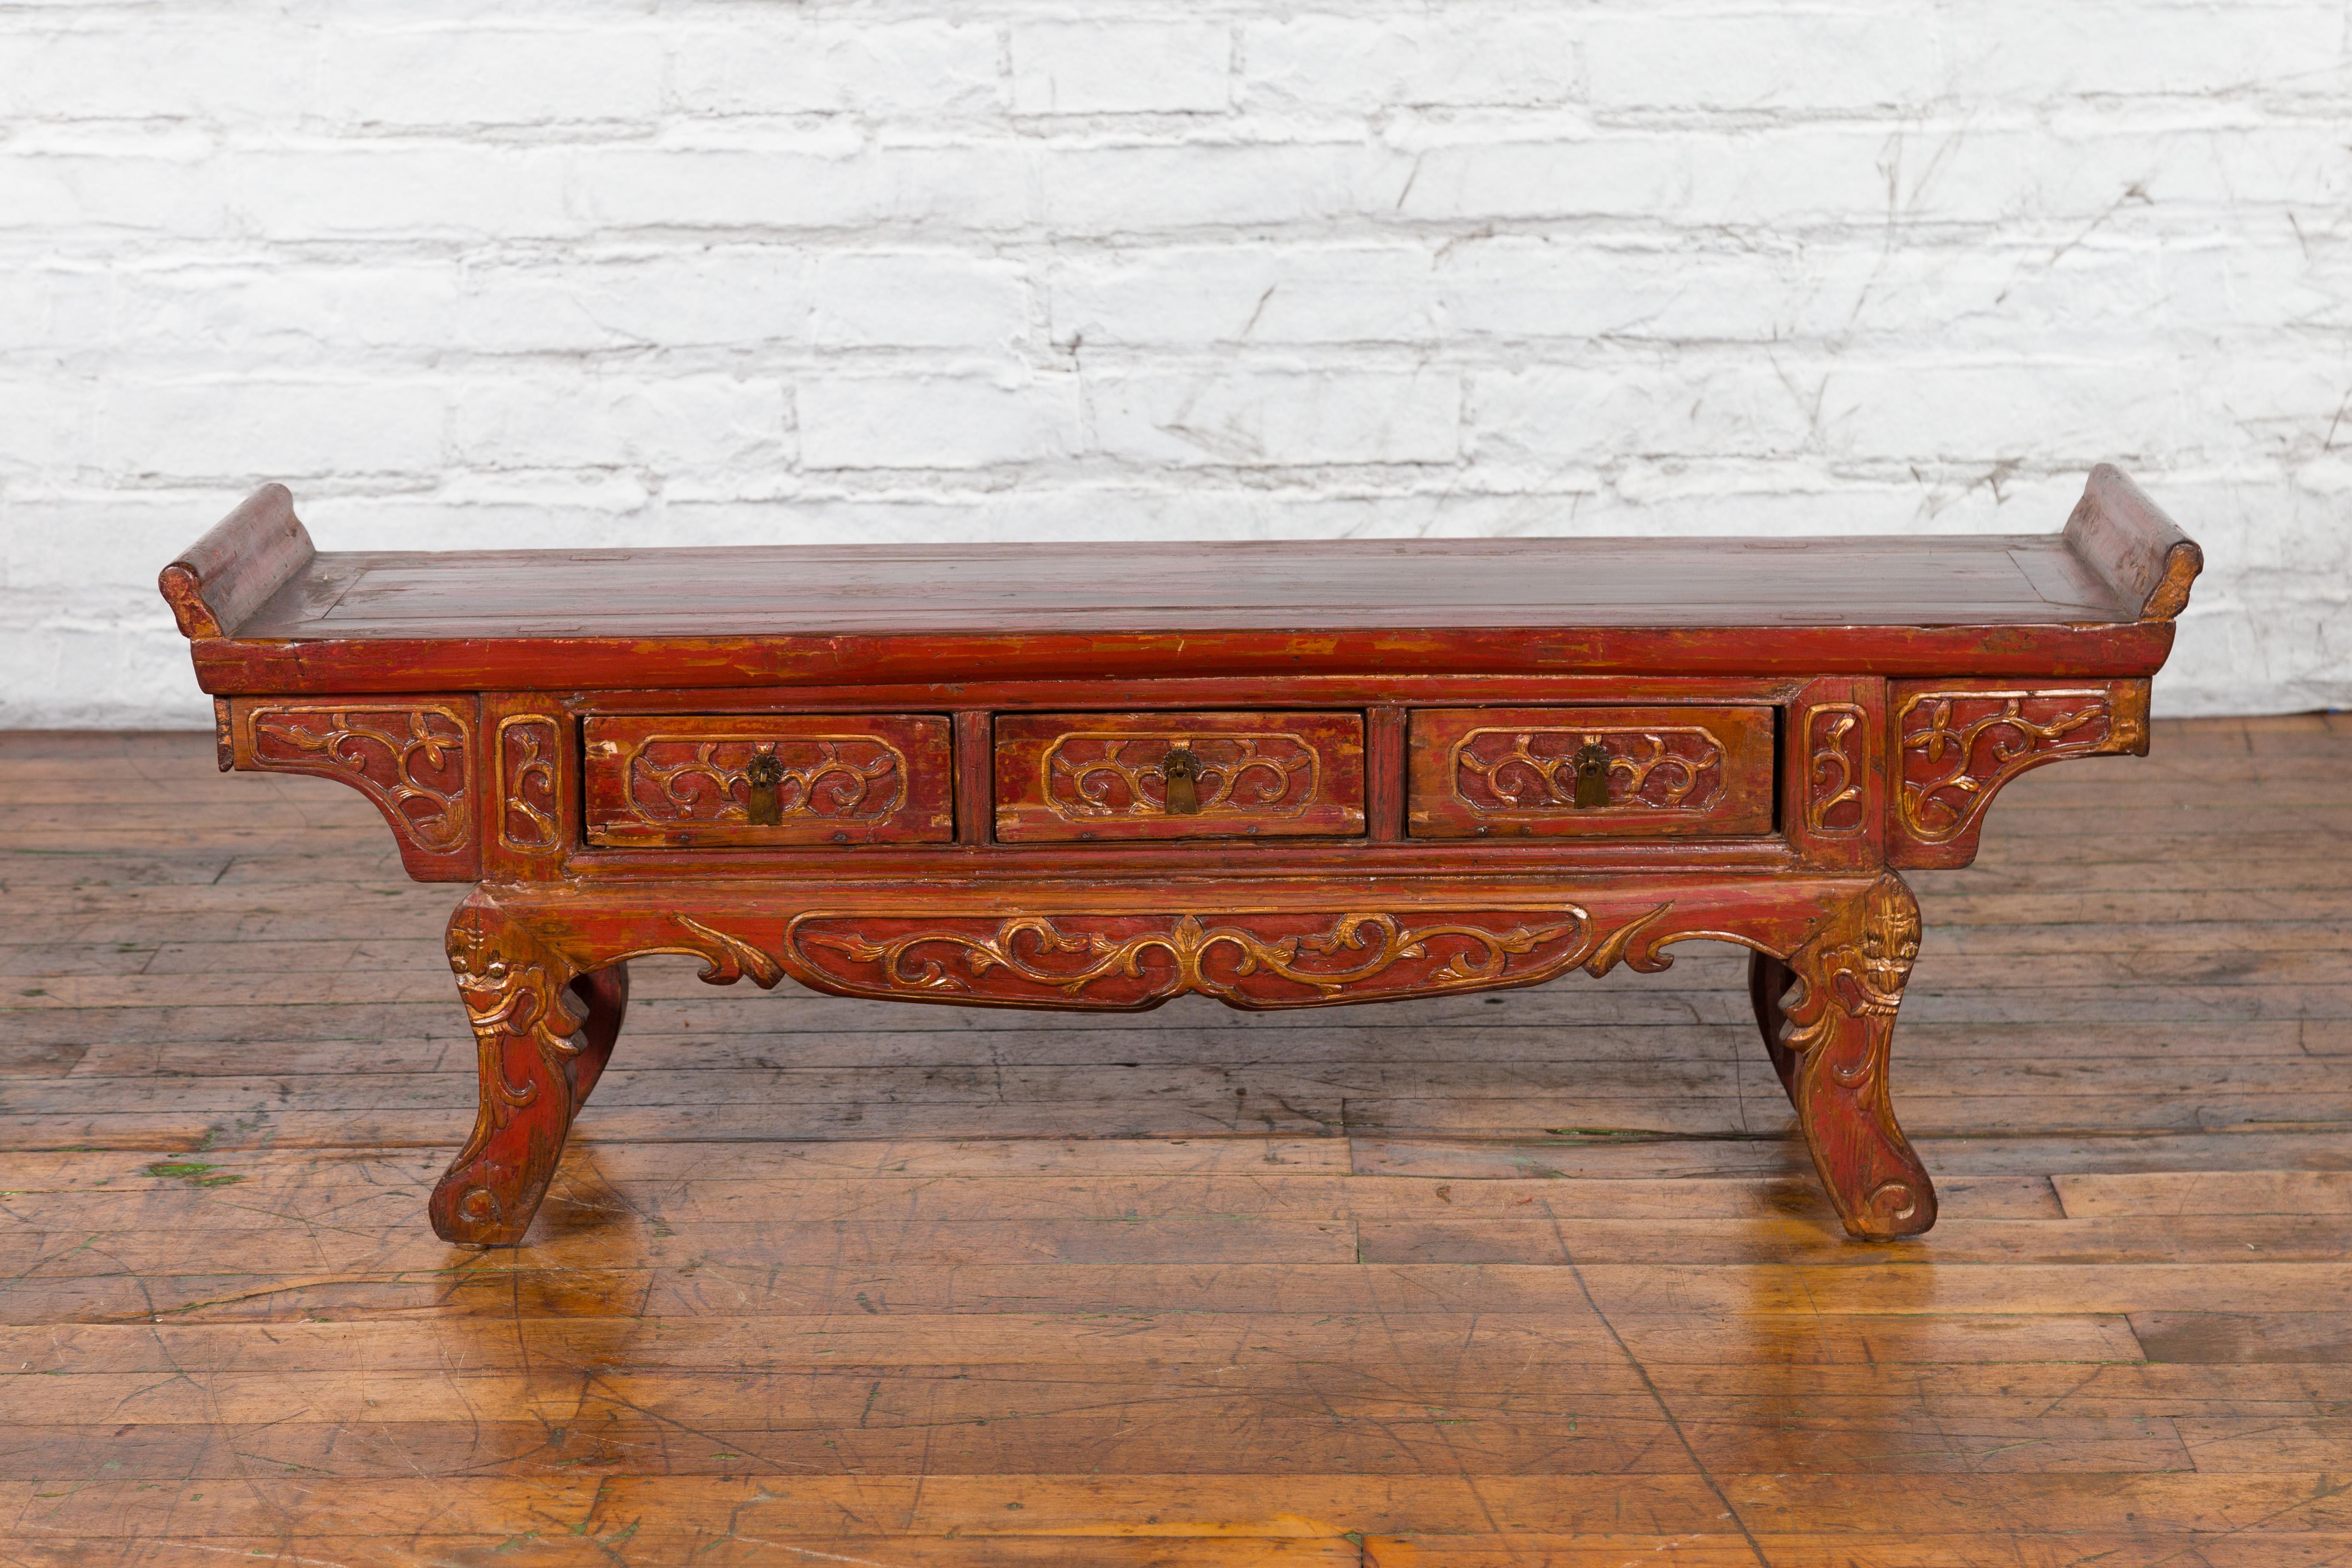 Chinese Qing Dynasty 19th Century Red Lacquer Low Altar Table with Carved Motifs For Sale 11